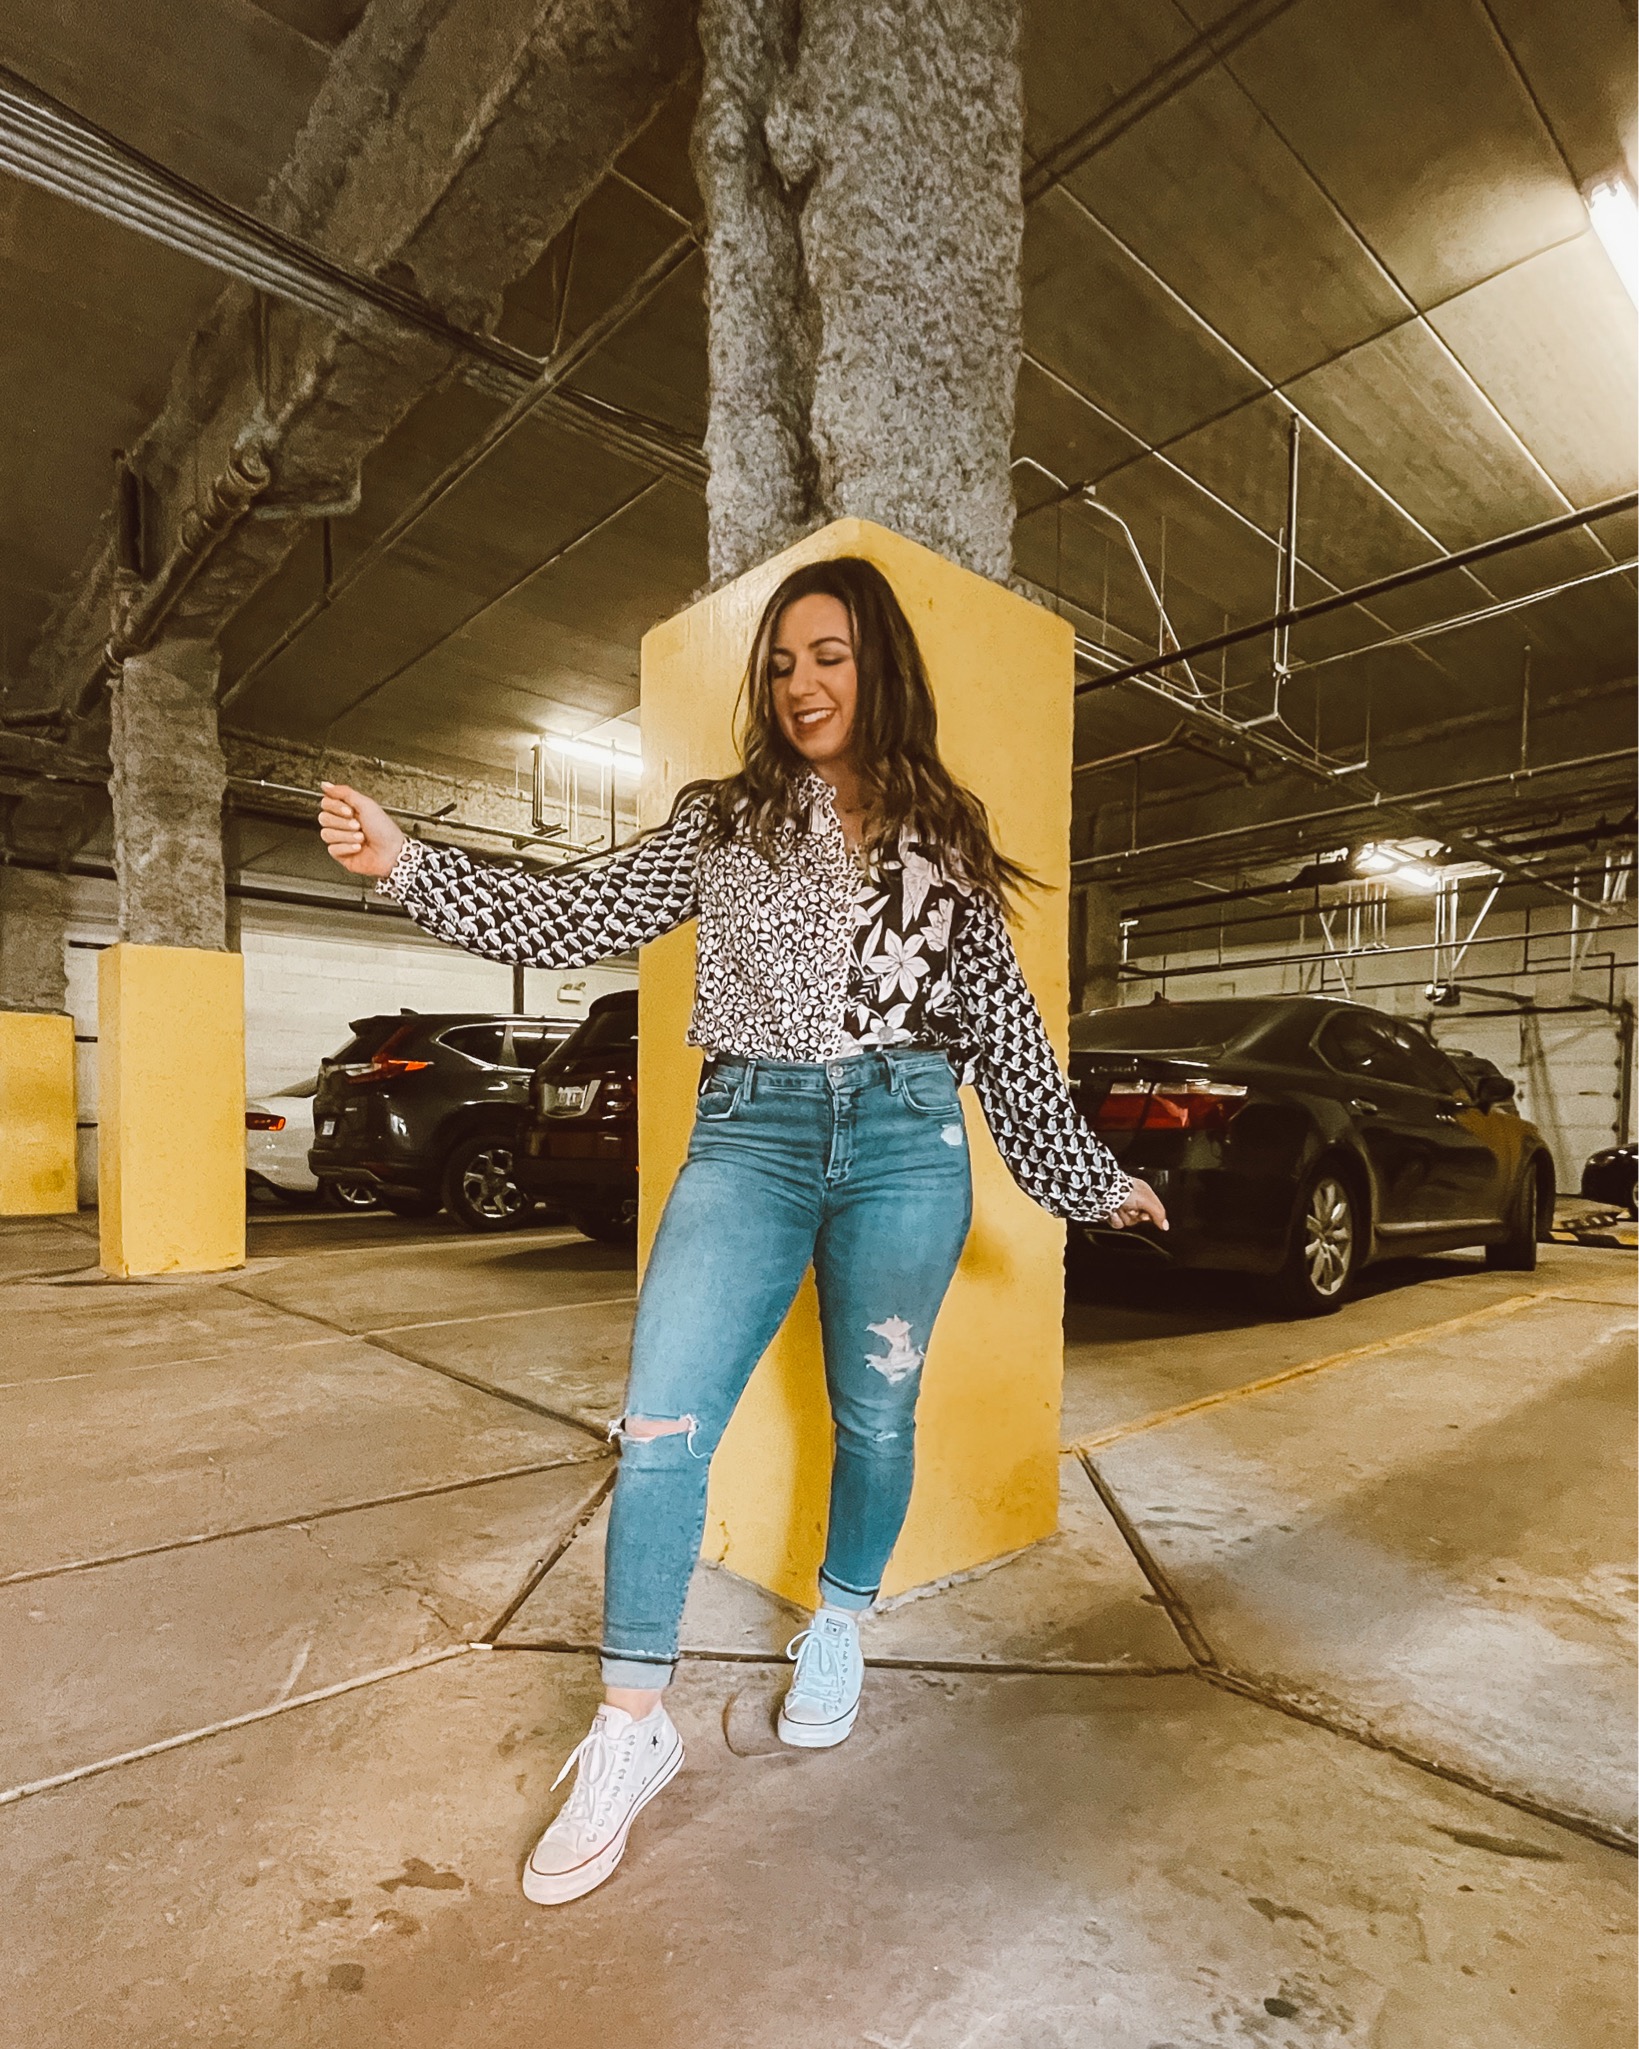 Tucked Shirt by popular Chicago fashion blog, Glass of Glam: image of a woman standing in a parking garage and wearing a black and white mixed print button up shirt, distressed denim, and white Converse sneakers. 